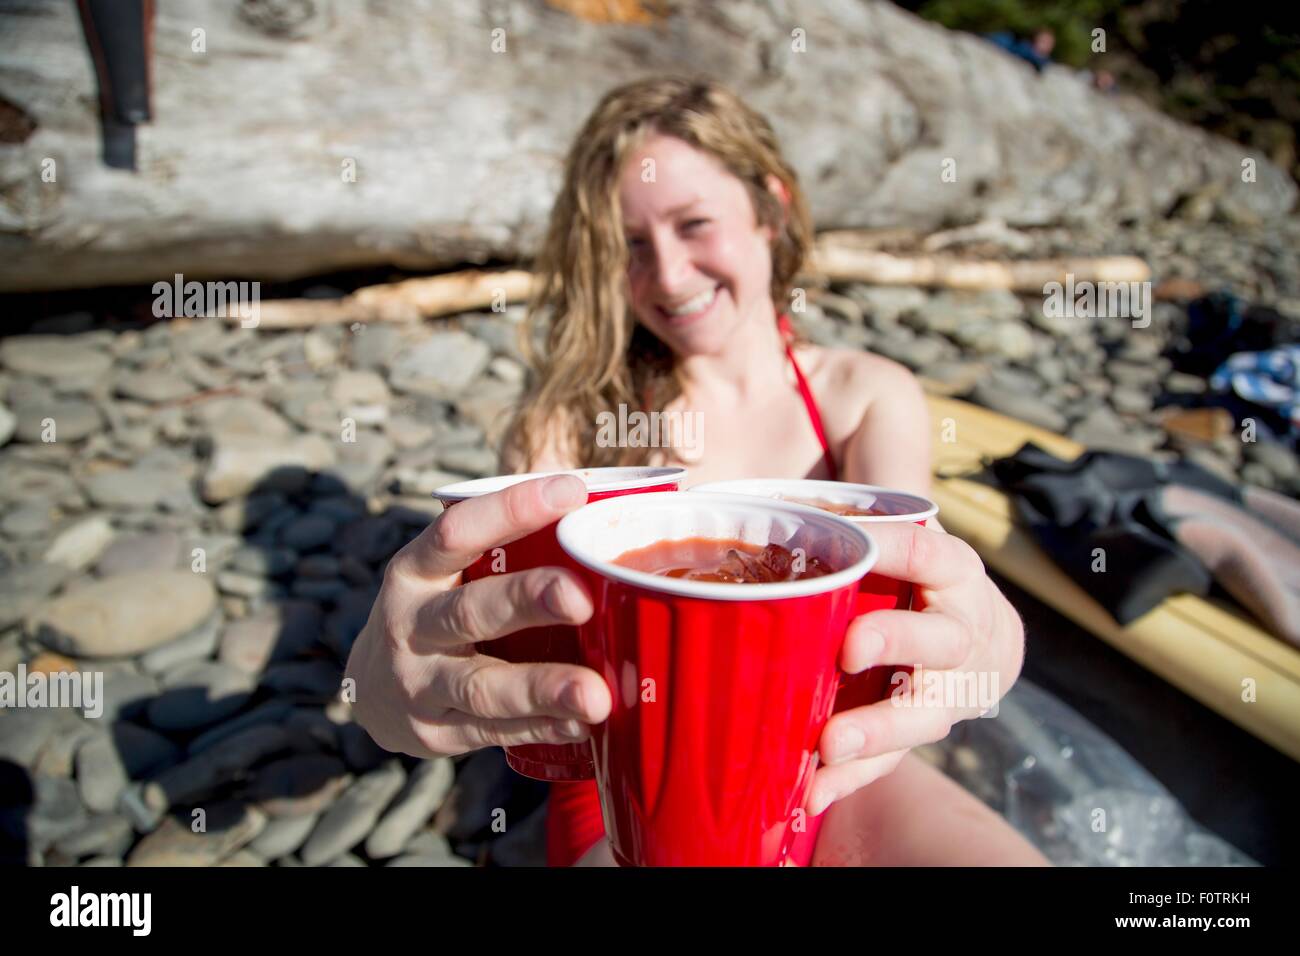 Young woman sitting on rocky beach, holding drinks, smiling, Short Sands Beach, Oregon, USA Stock Photo